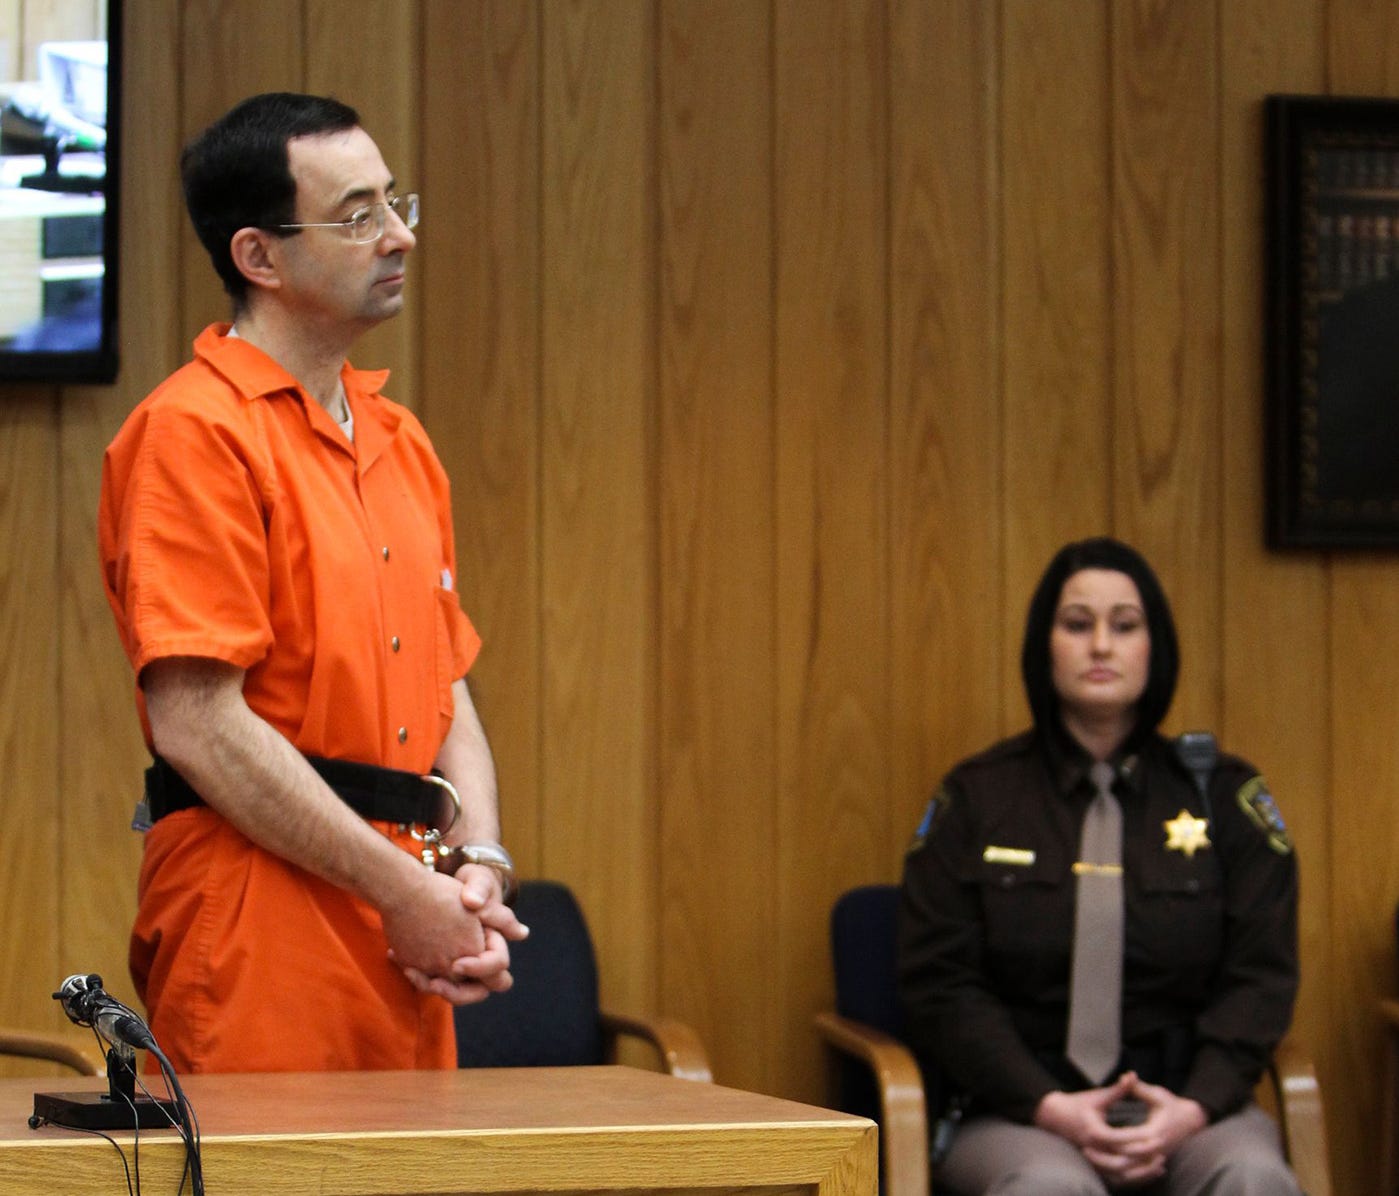 Larry Nassar stands to hear an Eaton County (Mich.) Circuit judge deliver his sentence Monday, Feb. 5, 2018, the third and final day of sentencing in Charlotte, Mich.